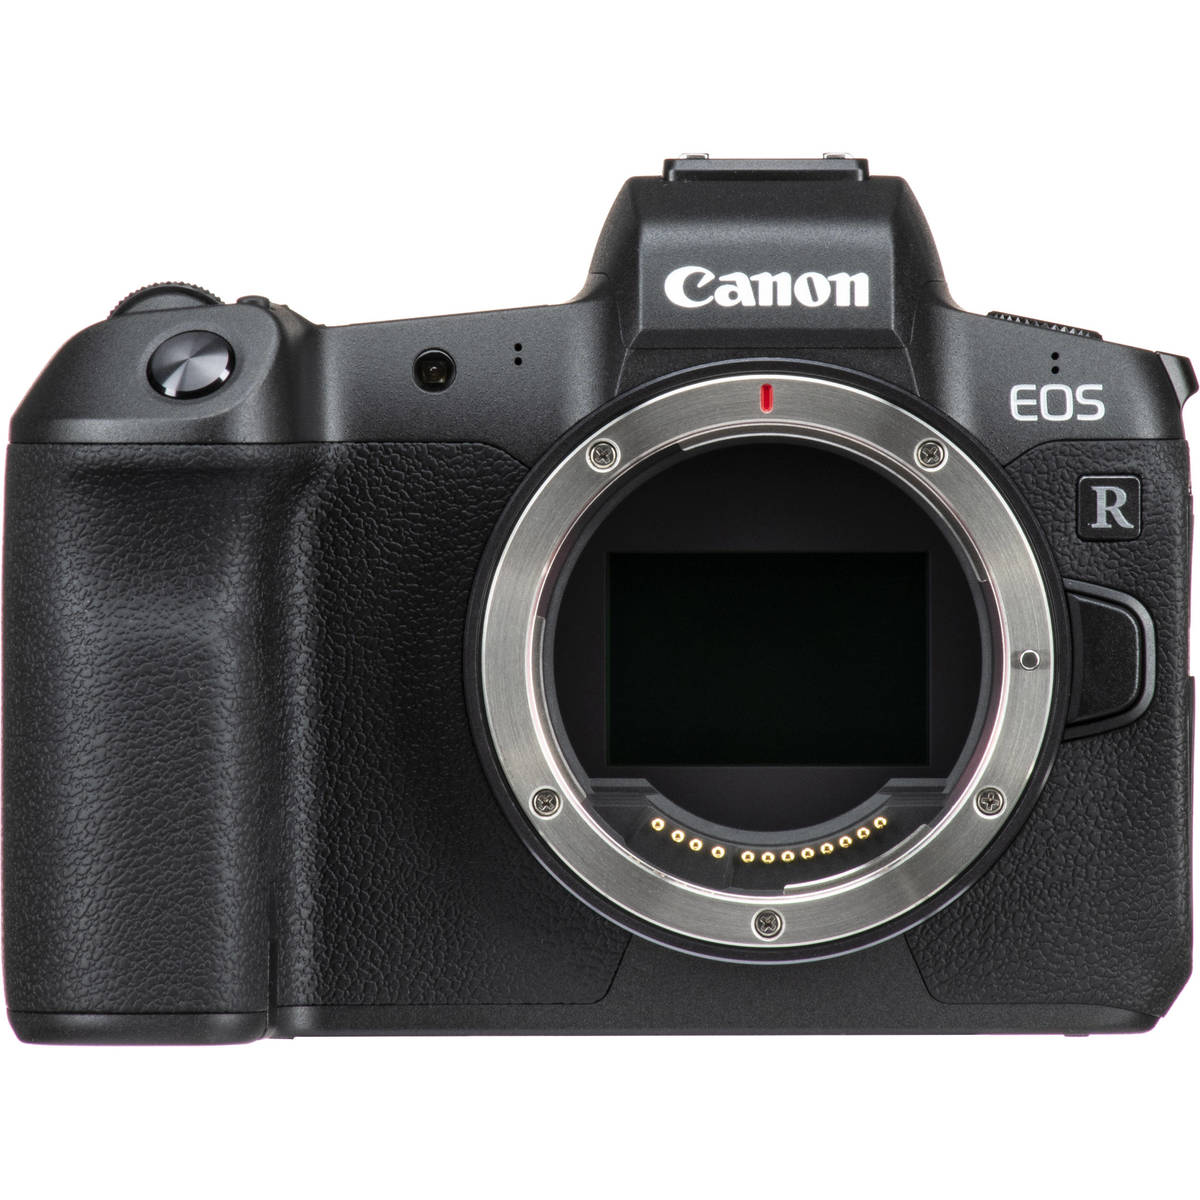 3. Canon EOS R Body (with adapter)